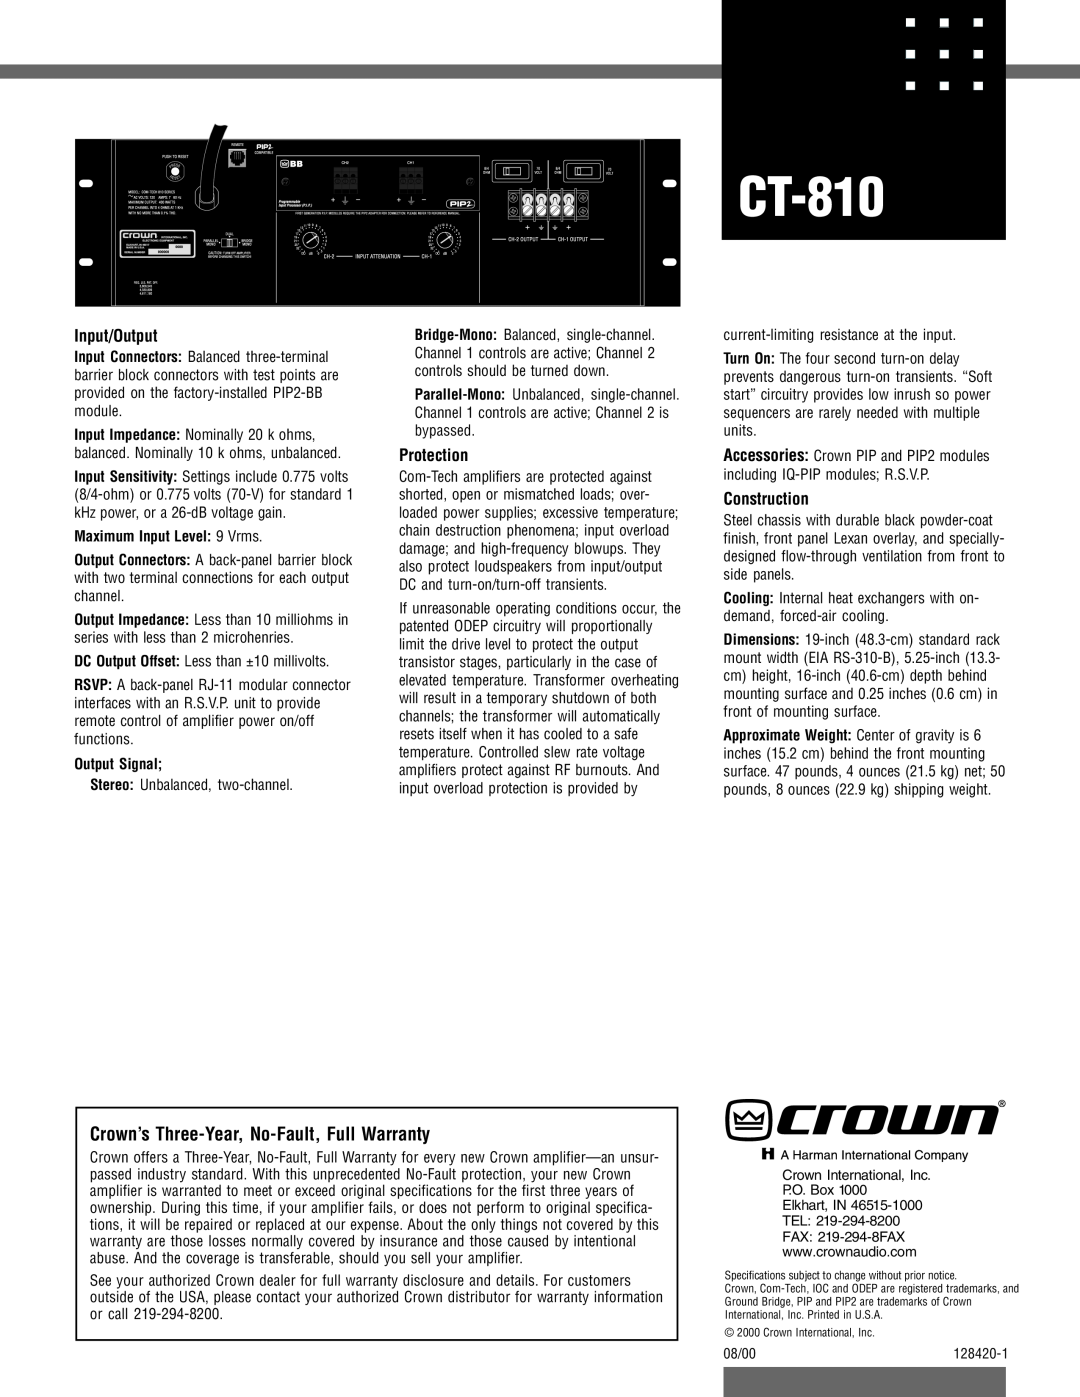 Crown Audio CT-810 specifications Crown’s Three-Year, No-Fault,Full Warranty, Input/Output, Protection, Construction 